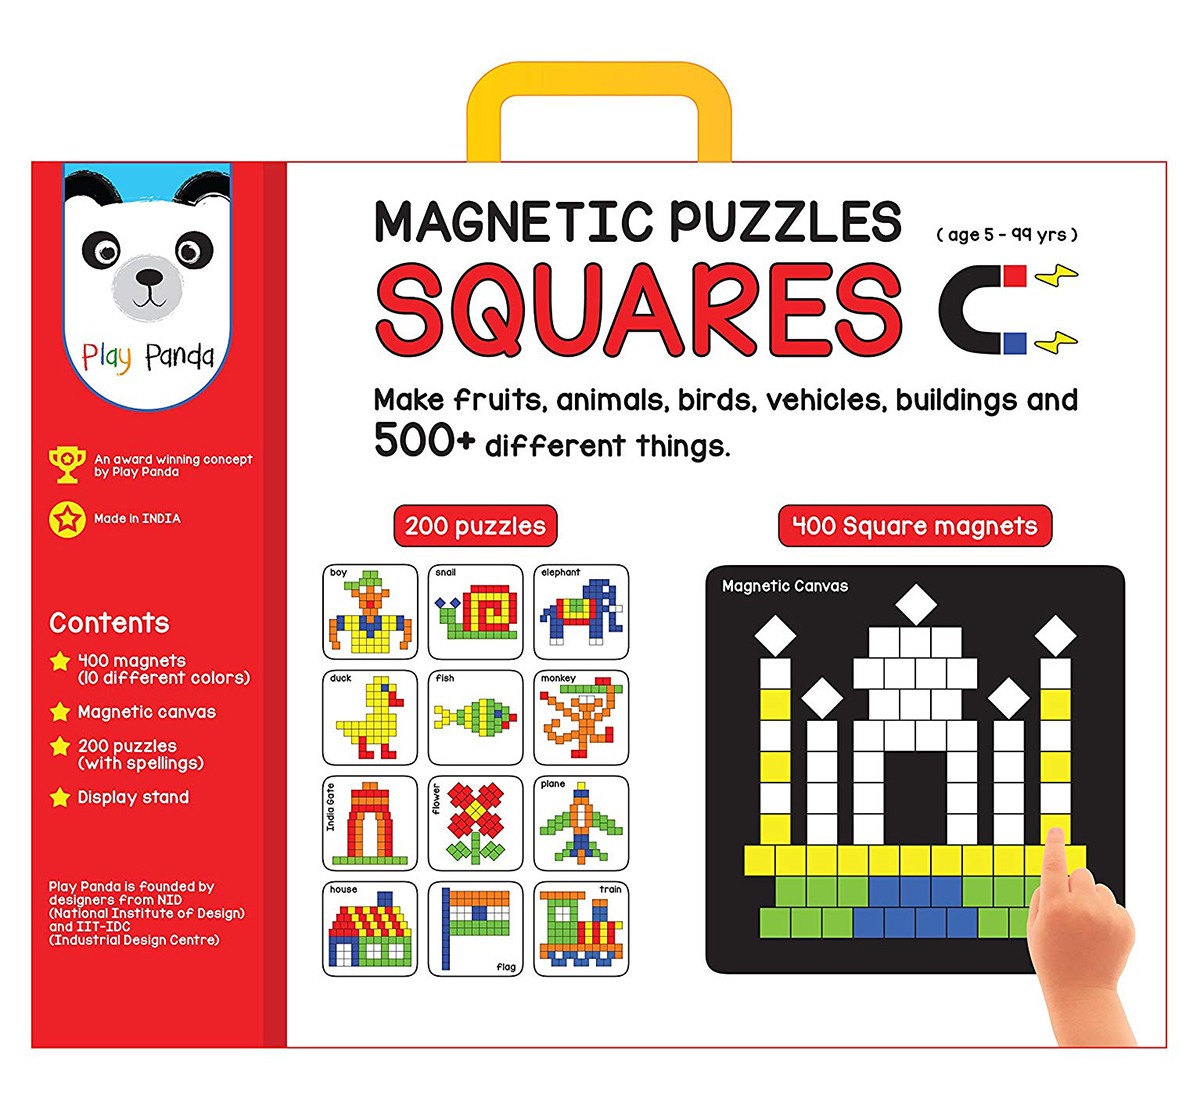 Play Panda Magnetic Puzzles Squares With 400 Colorful Magnets, 200 Puzzle Book, Magnetic Board And Display Stand,  4Y+ (Multicolor)